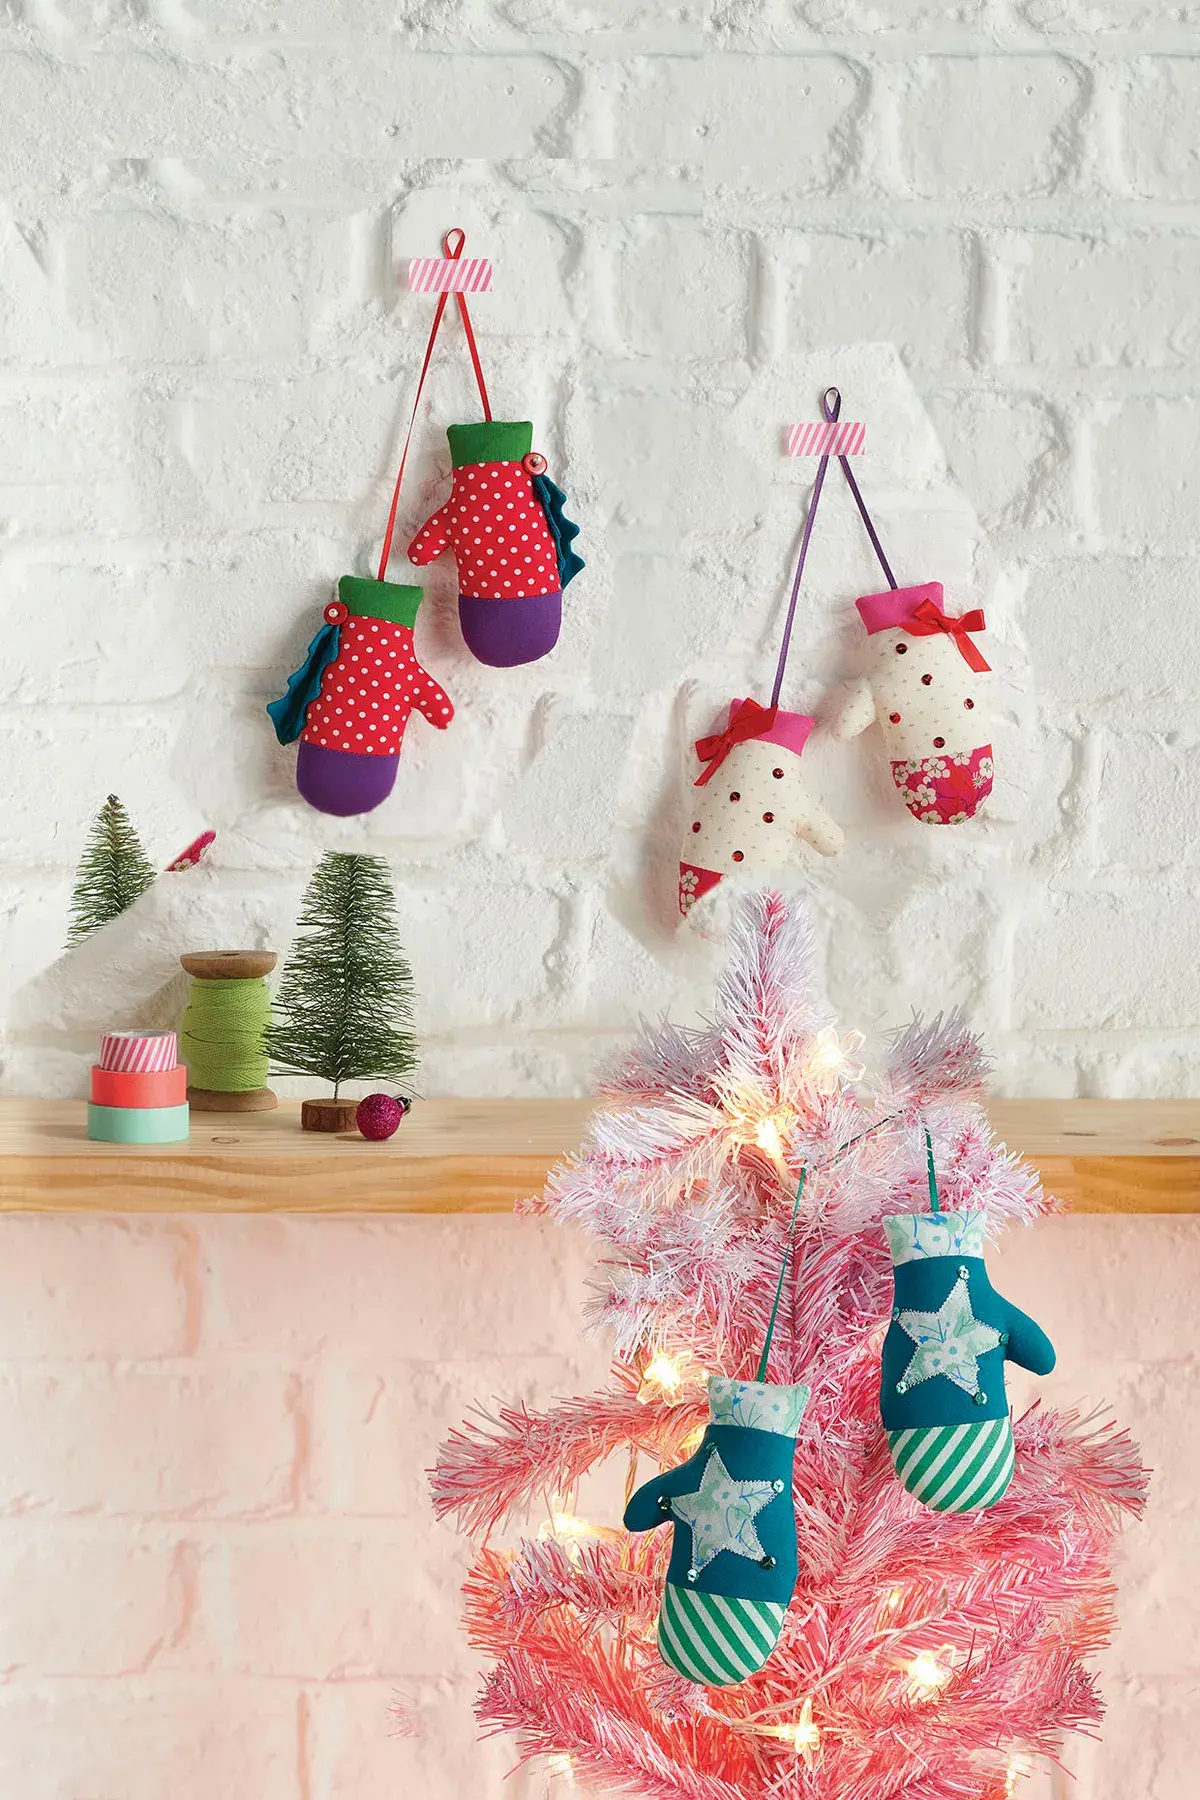 How to make mitten tree decorations